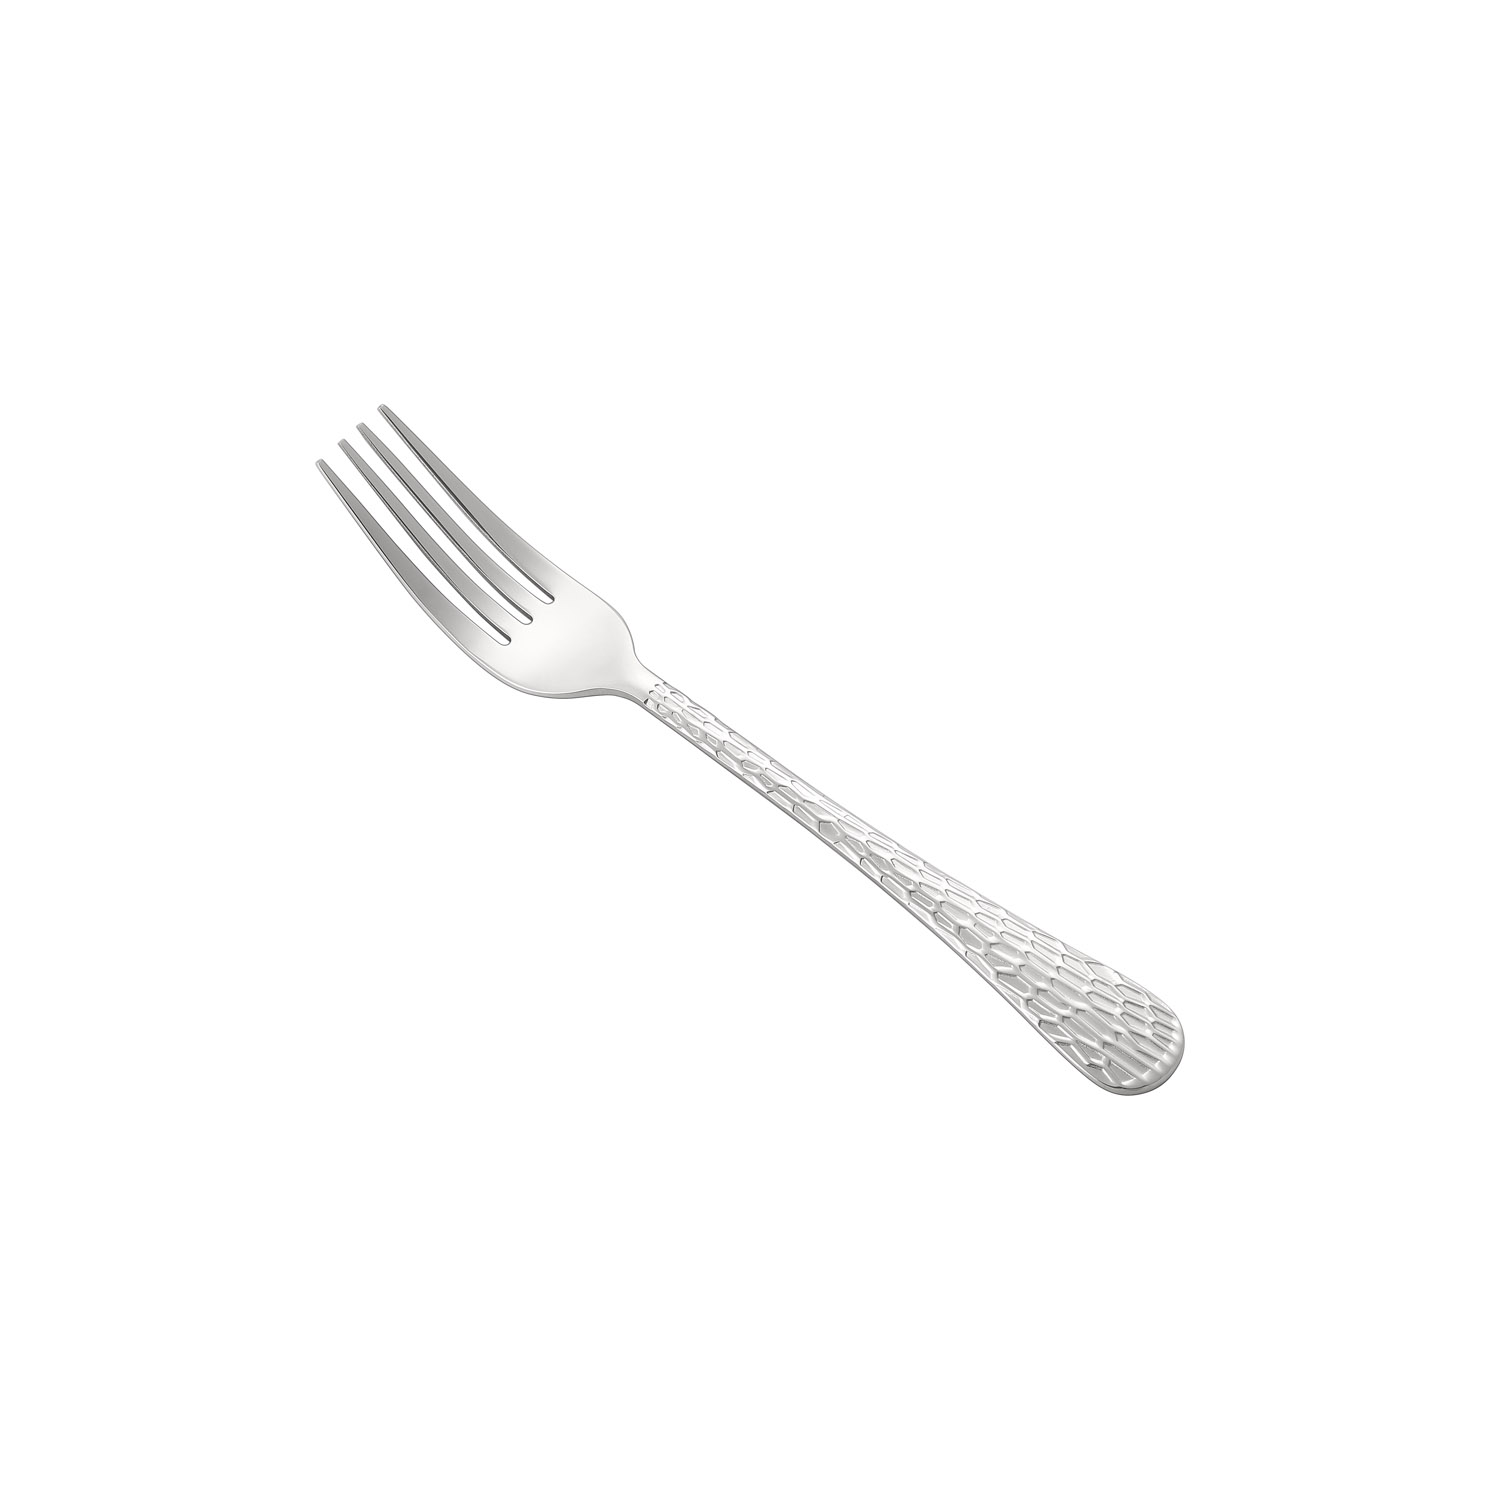 CAC China 3015-05 Celtic Dinner Fork, Heavyweight 18/0, 7-5/8"